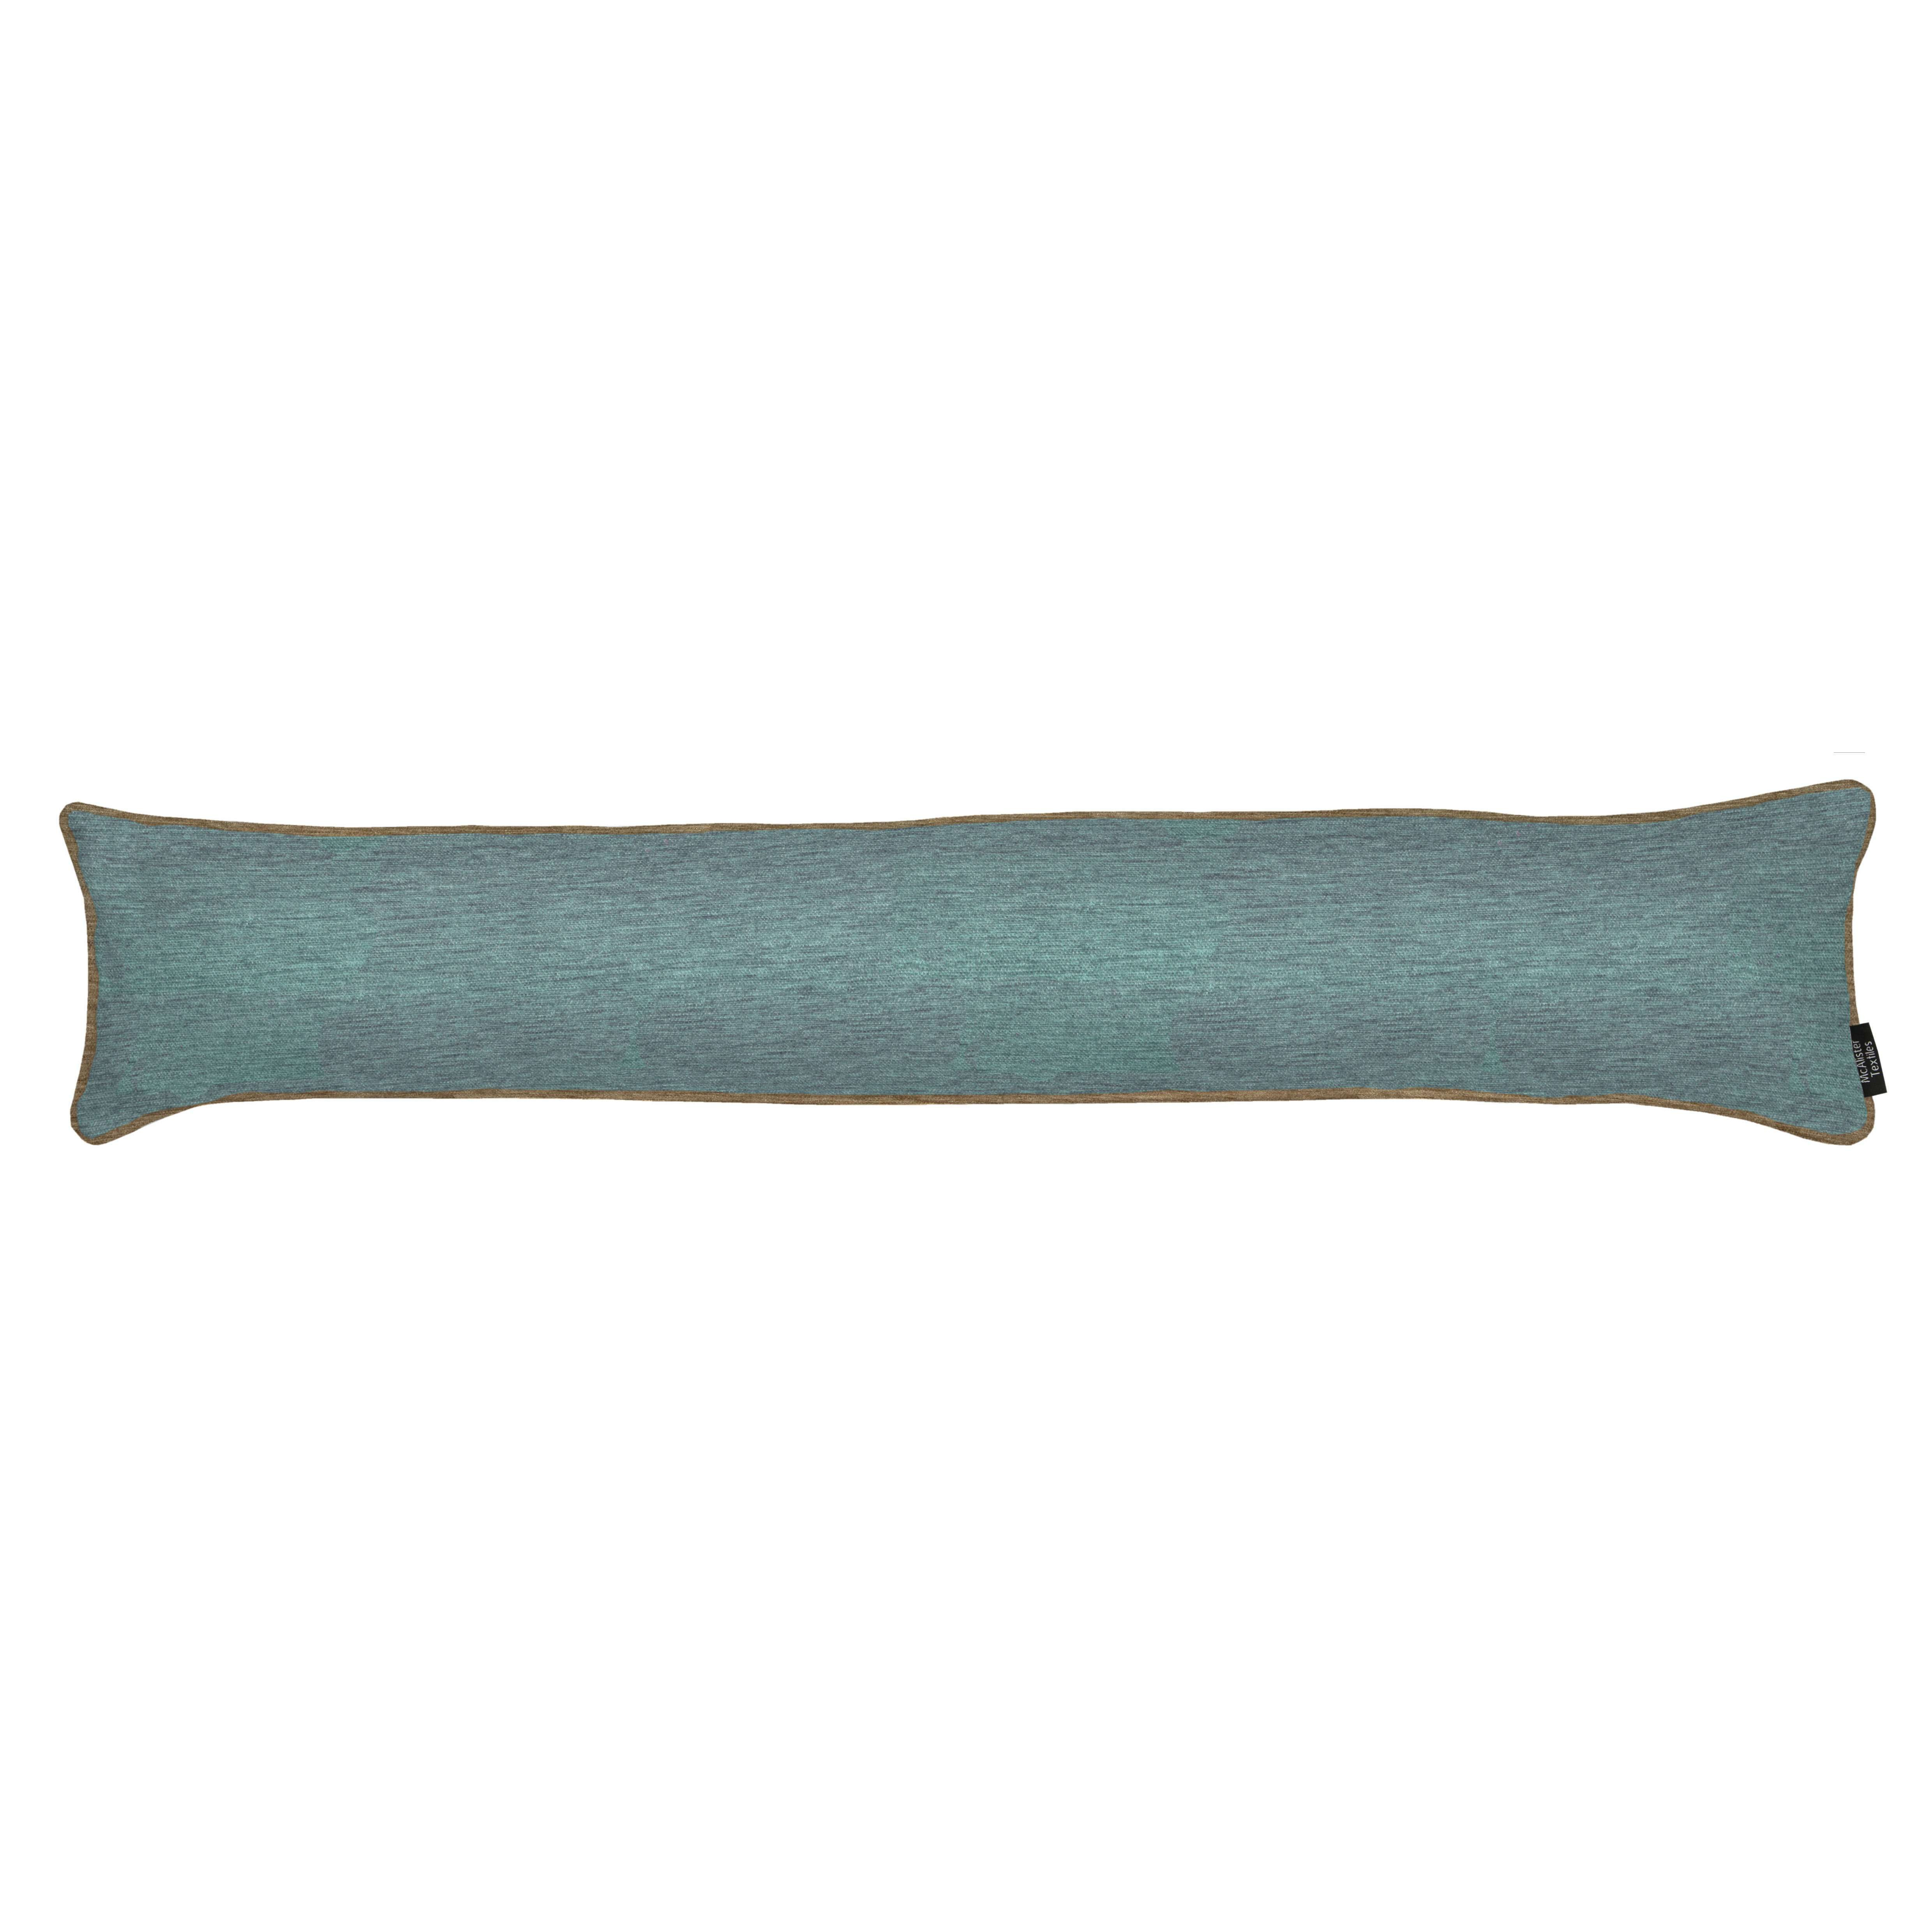 Plain Chenille Contrast Piped Blue + Beige Draught Excluder, 18cm x 100cm